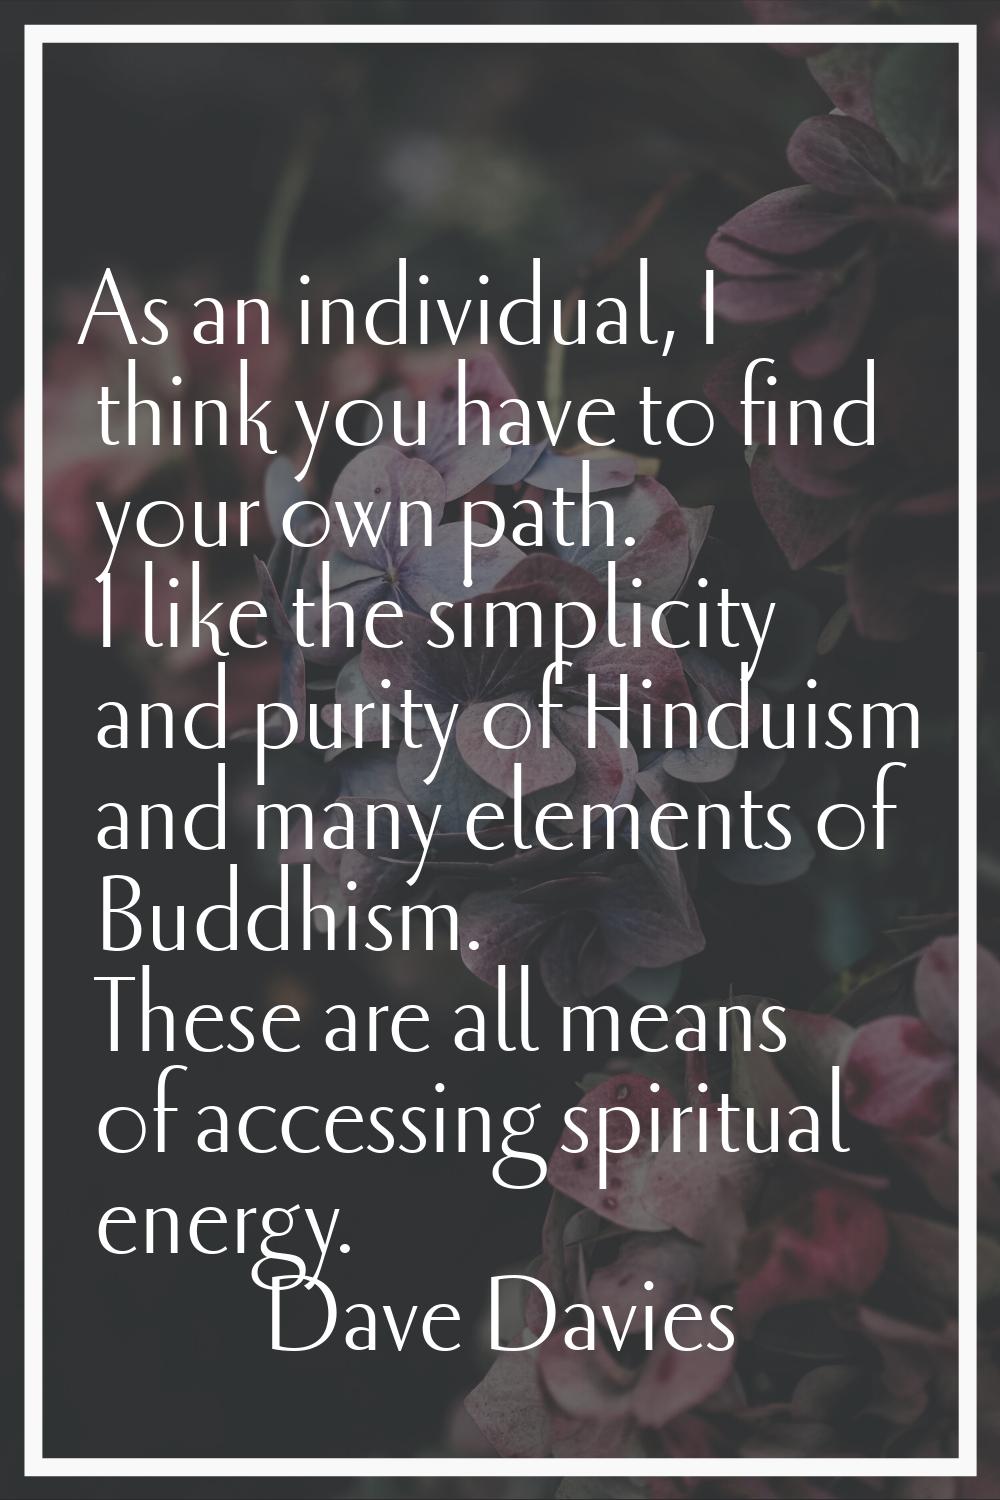 As an individual, I think you have to find your own path. I like the simplicity and purity of Hindu